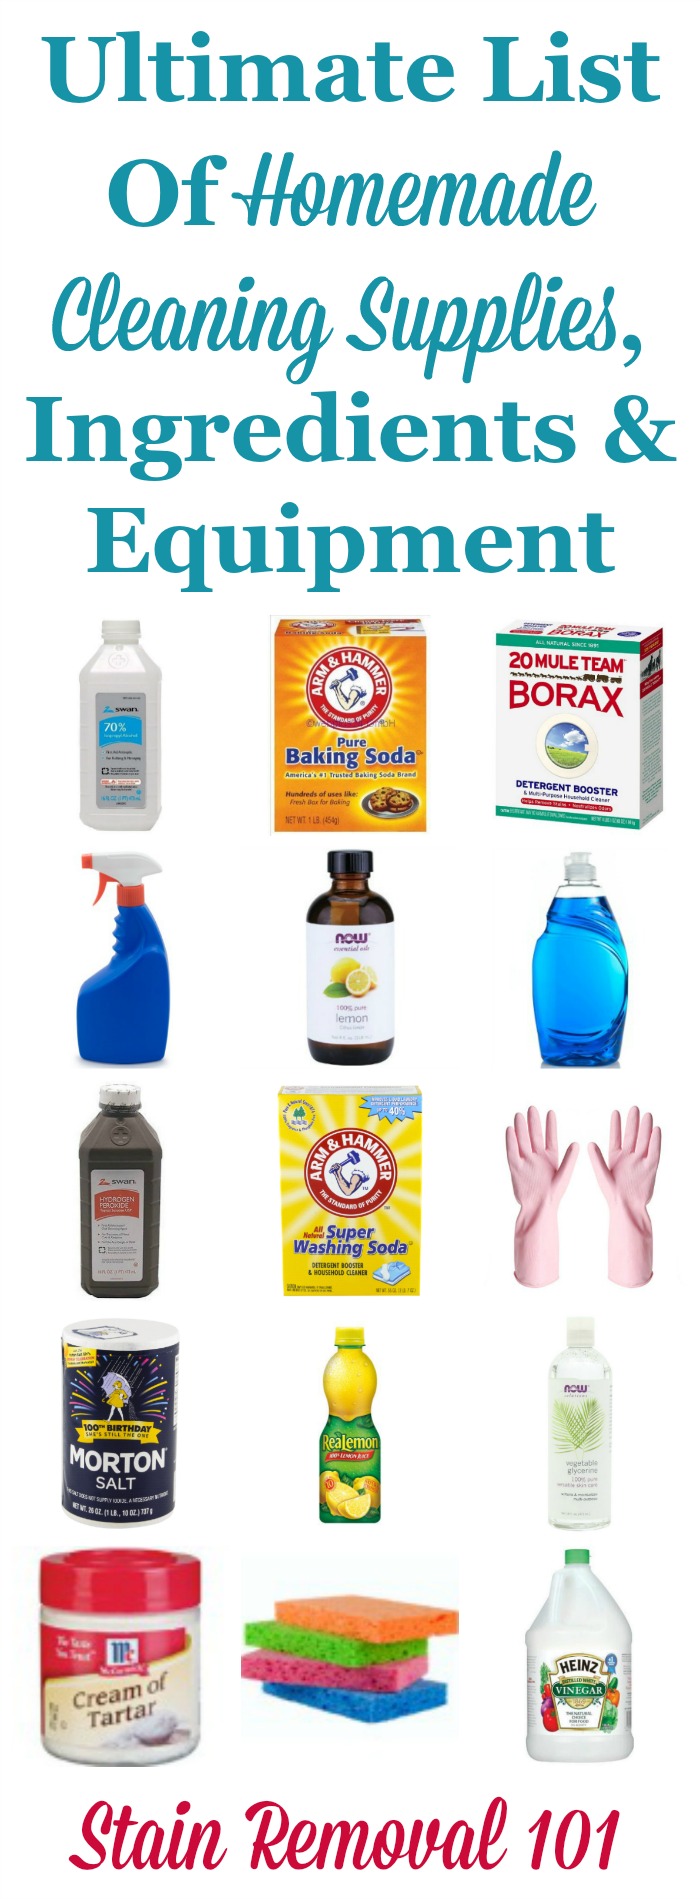 Cleaning supplies samples